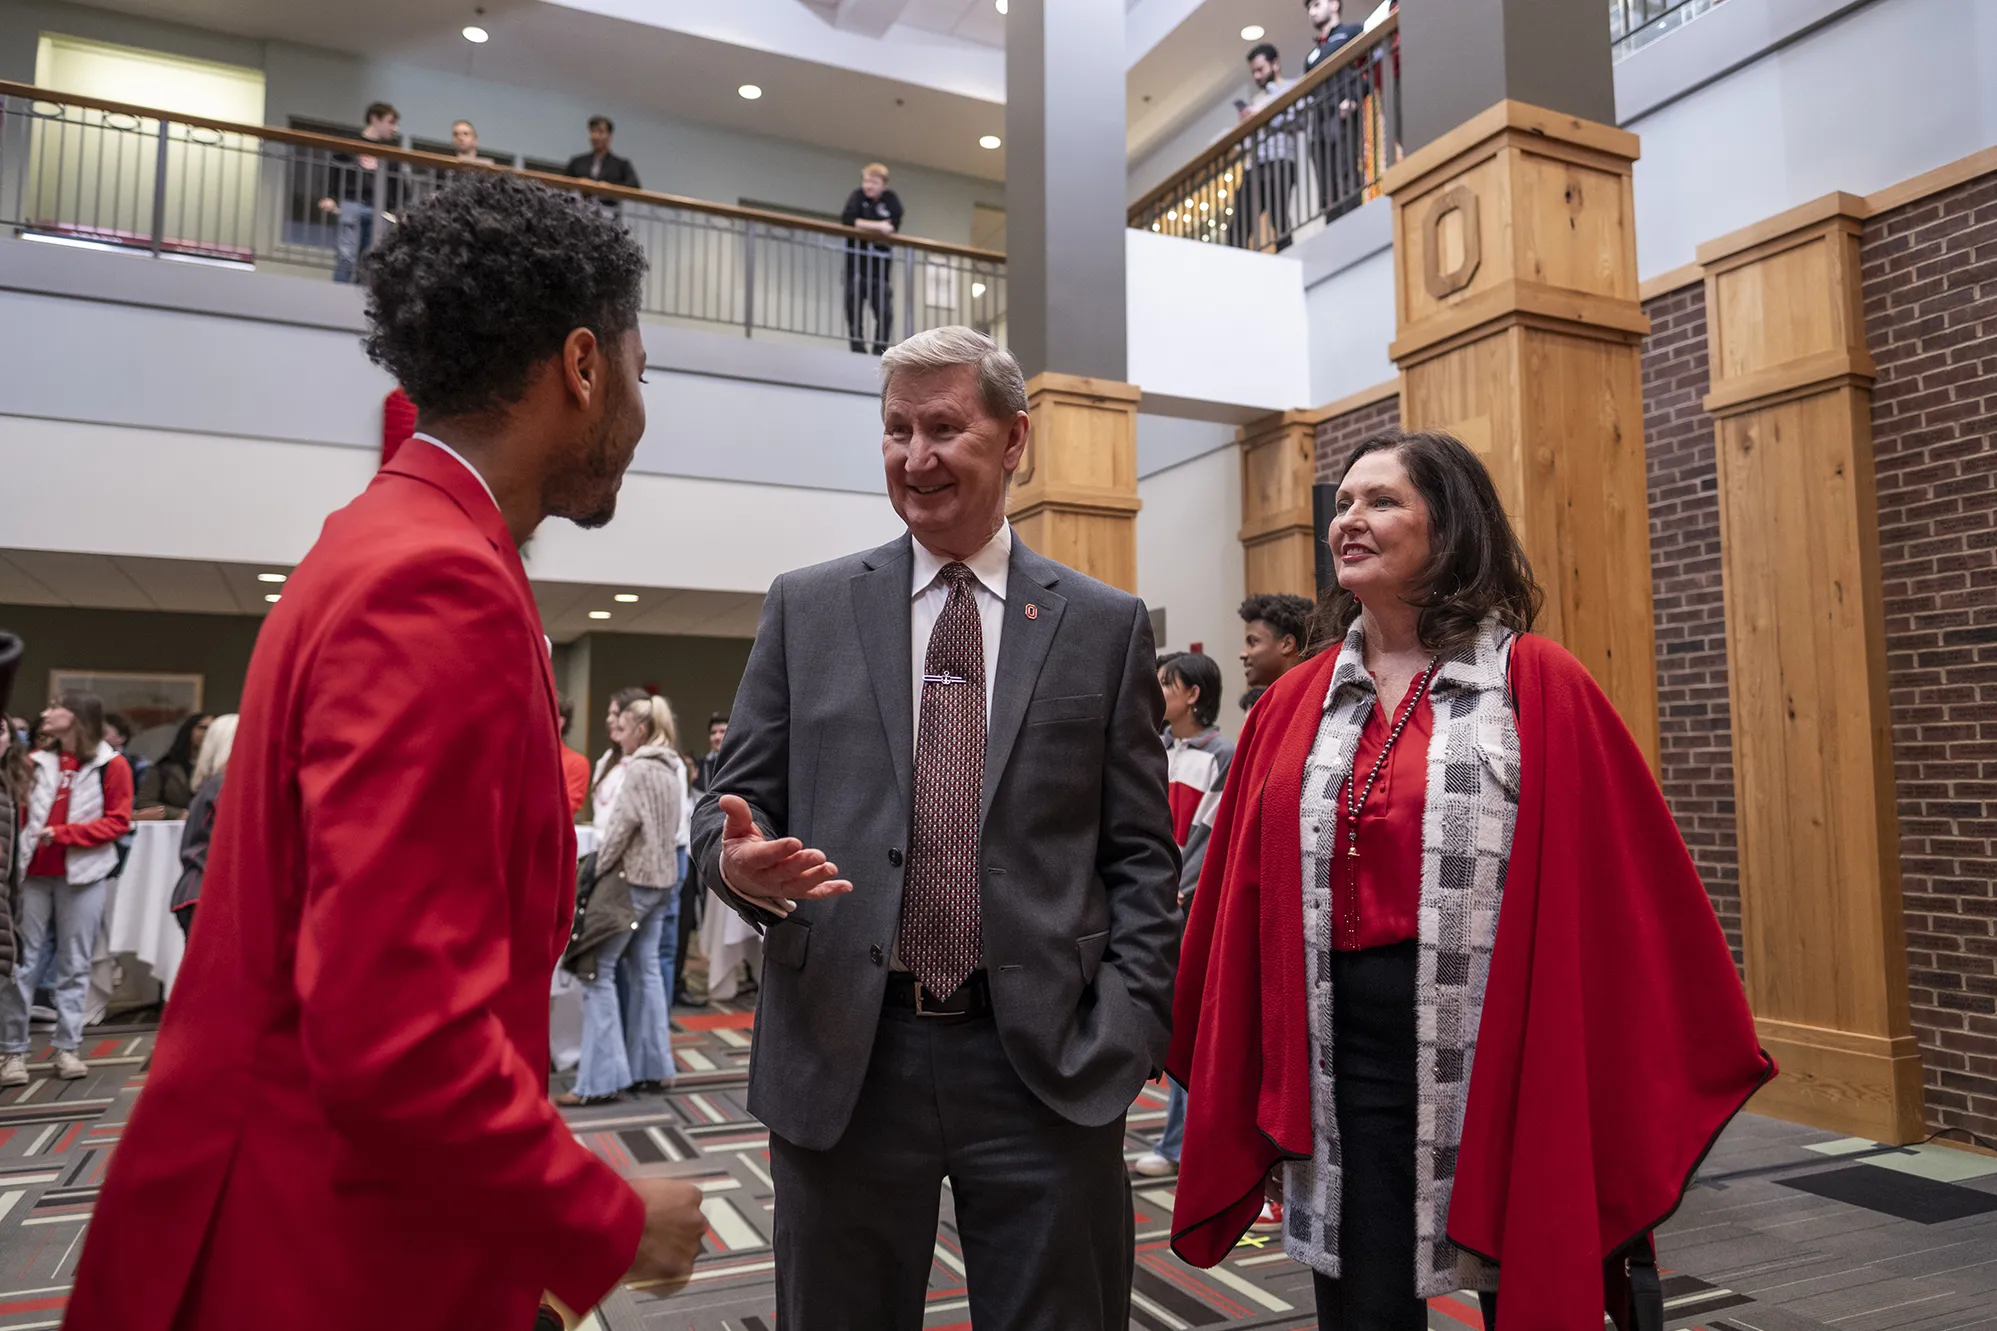 President Carter and his wife, Lynda, speak with Bobby McAlpine, president of the Undergraduate Student Government, at a student welcome reception in the Union. President Carter’s expression shows he is enjoying the conversation, and both he and his wife are paying close attention to McAlpine. They are all dressed well and other students mill in the background.